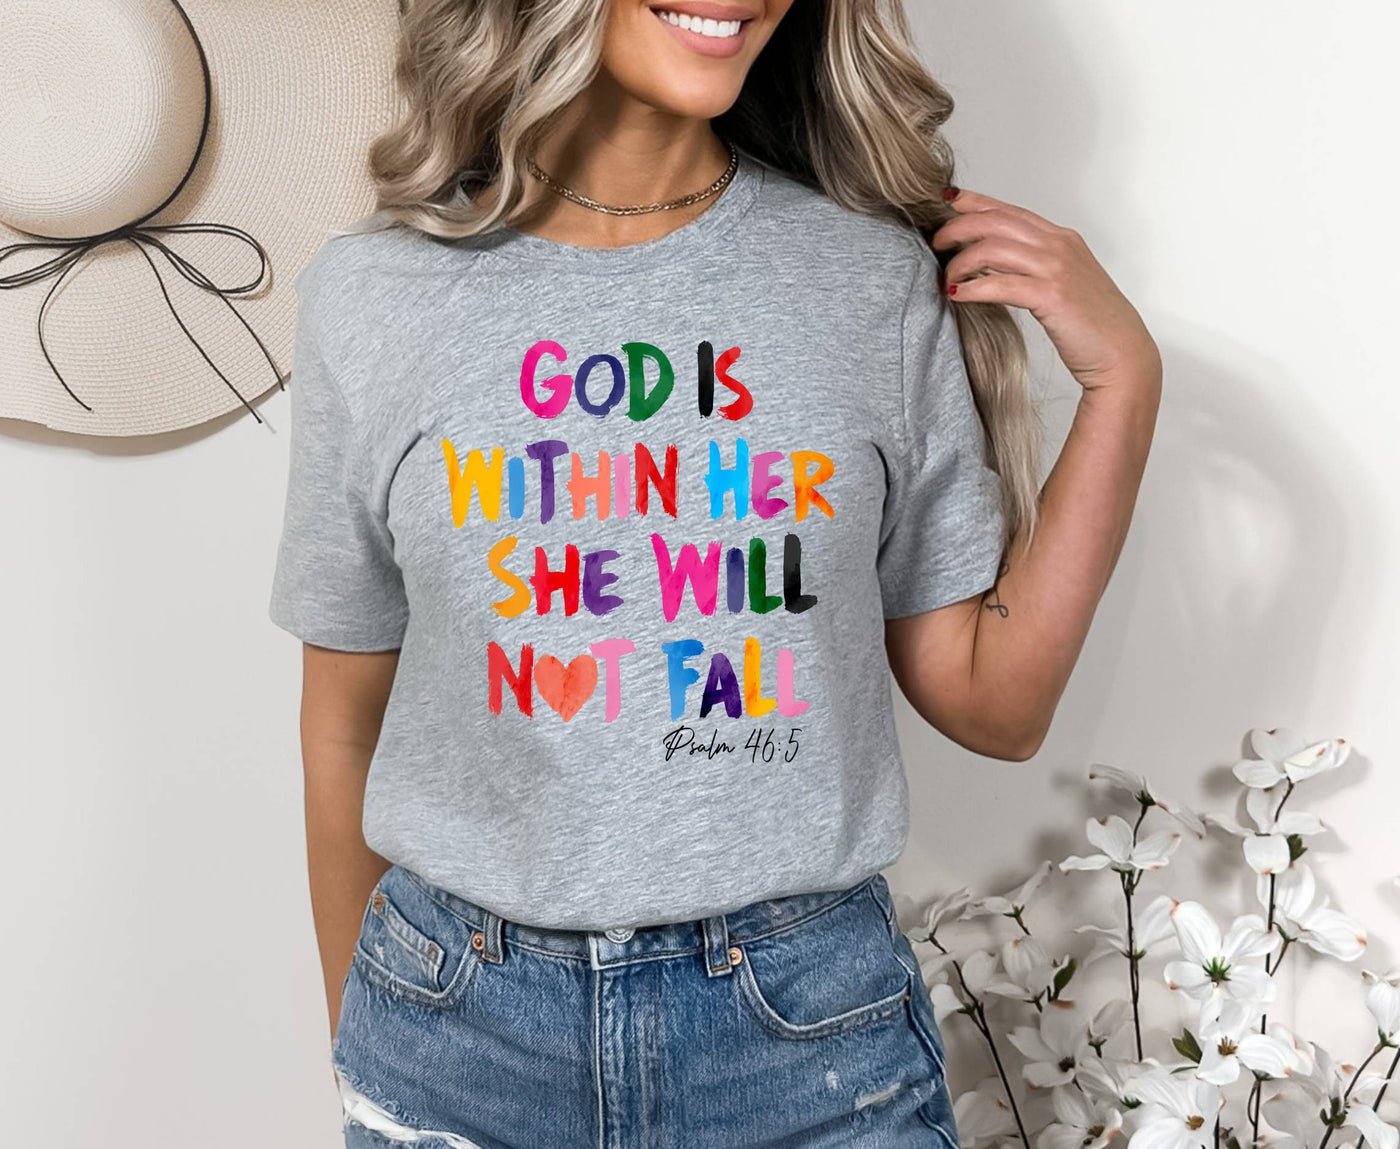 God is within her, she will not fall Psalm 46:5